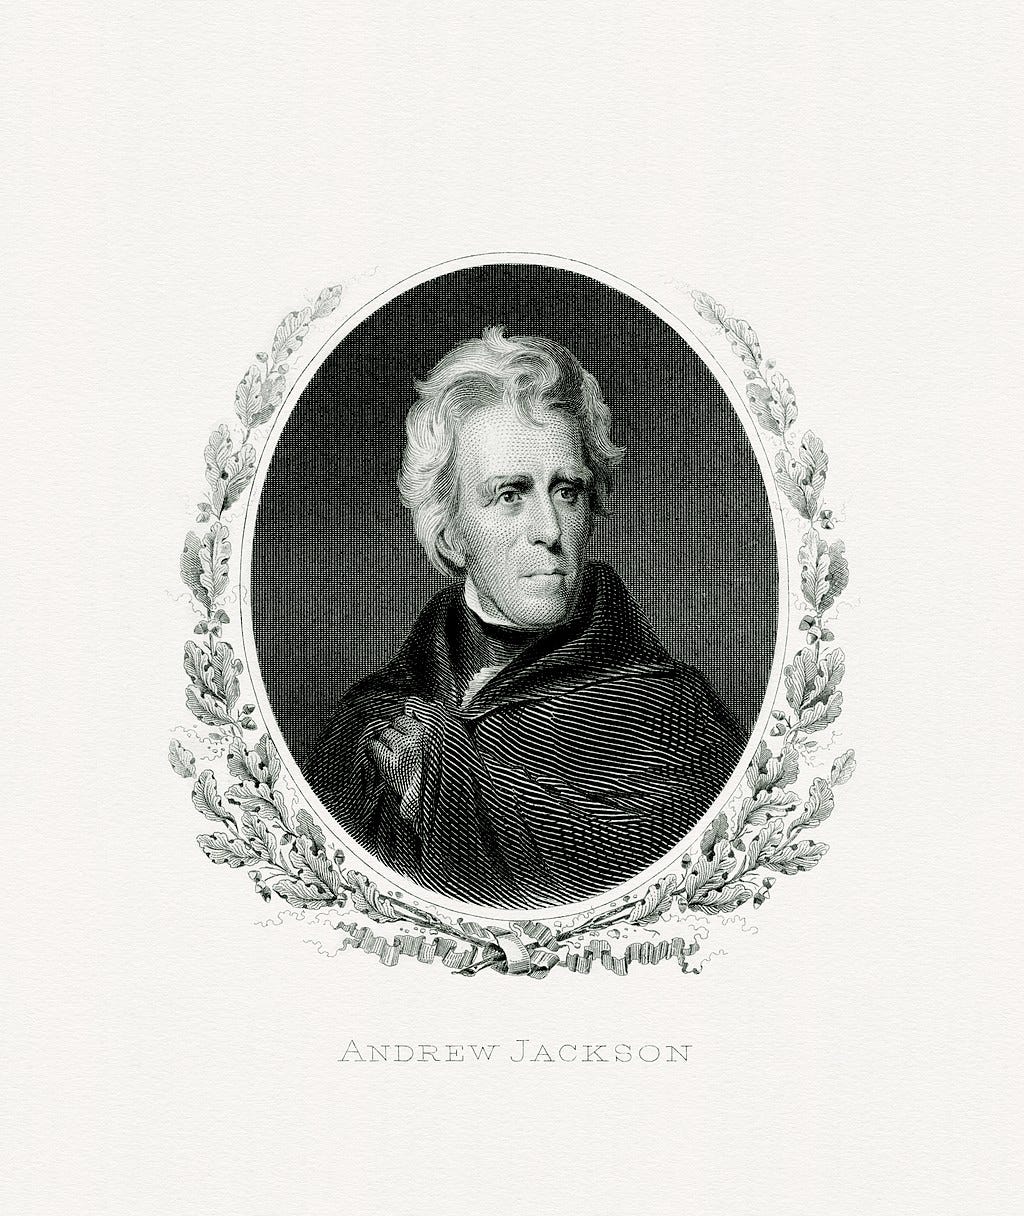 Engraved portrait of Jackson as president by the Bureau of Engraving and Printing. This portrait has appeared on the $20 bill since 1929.[326]